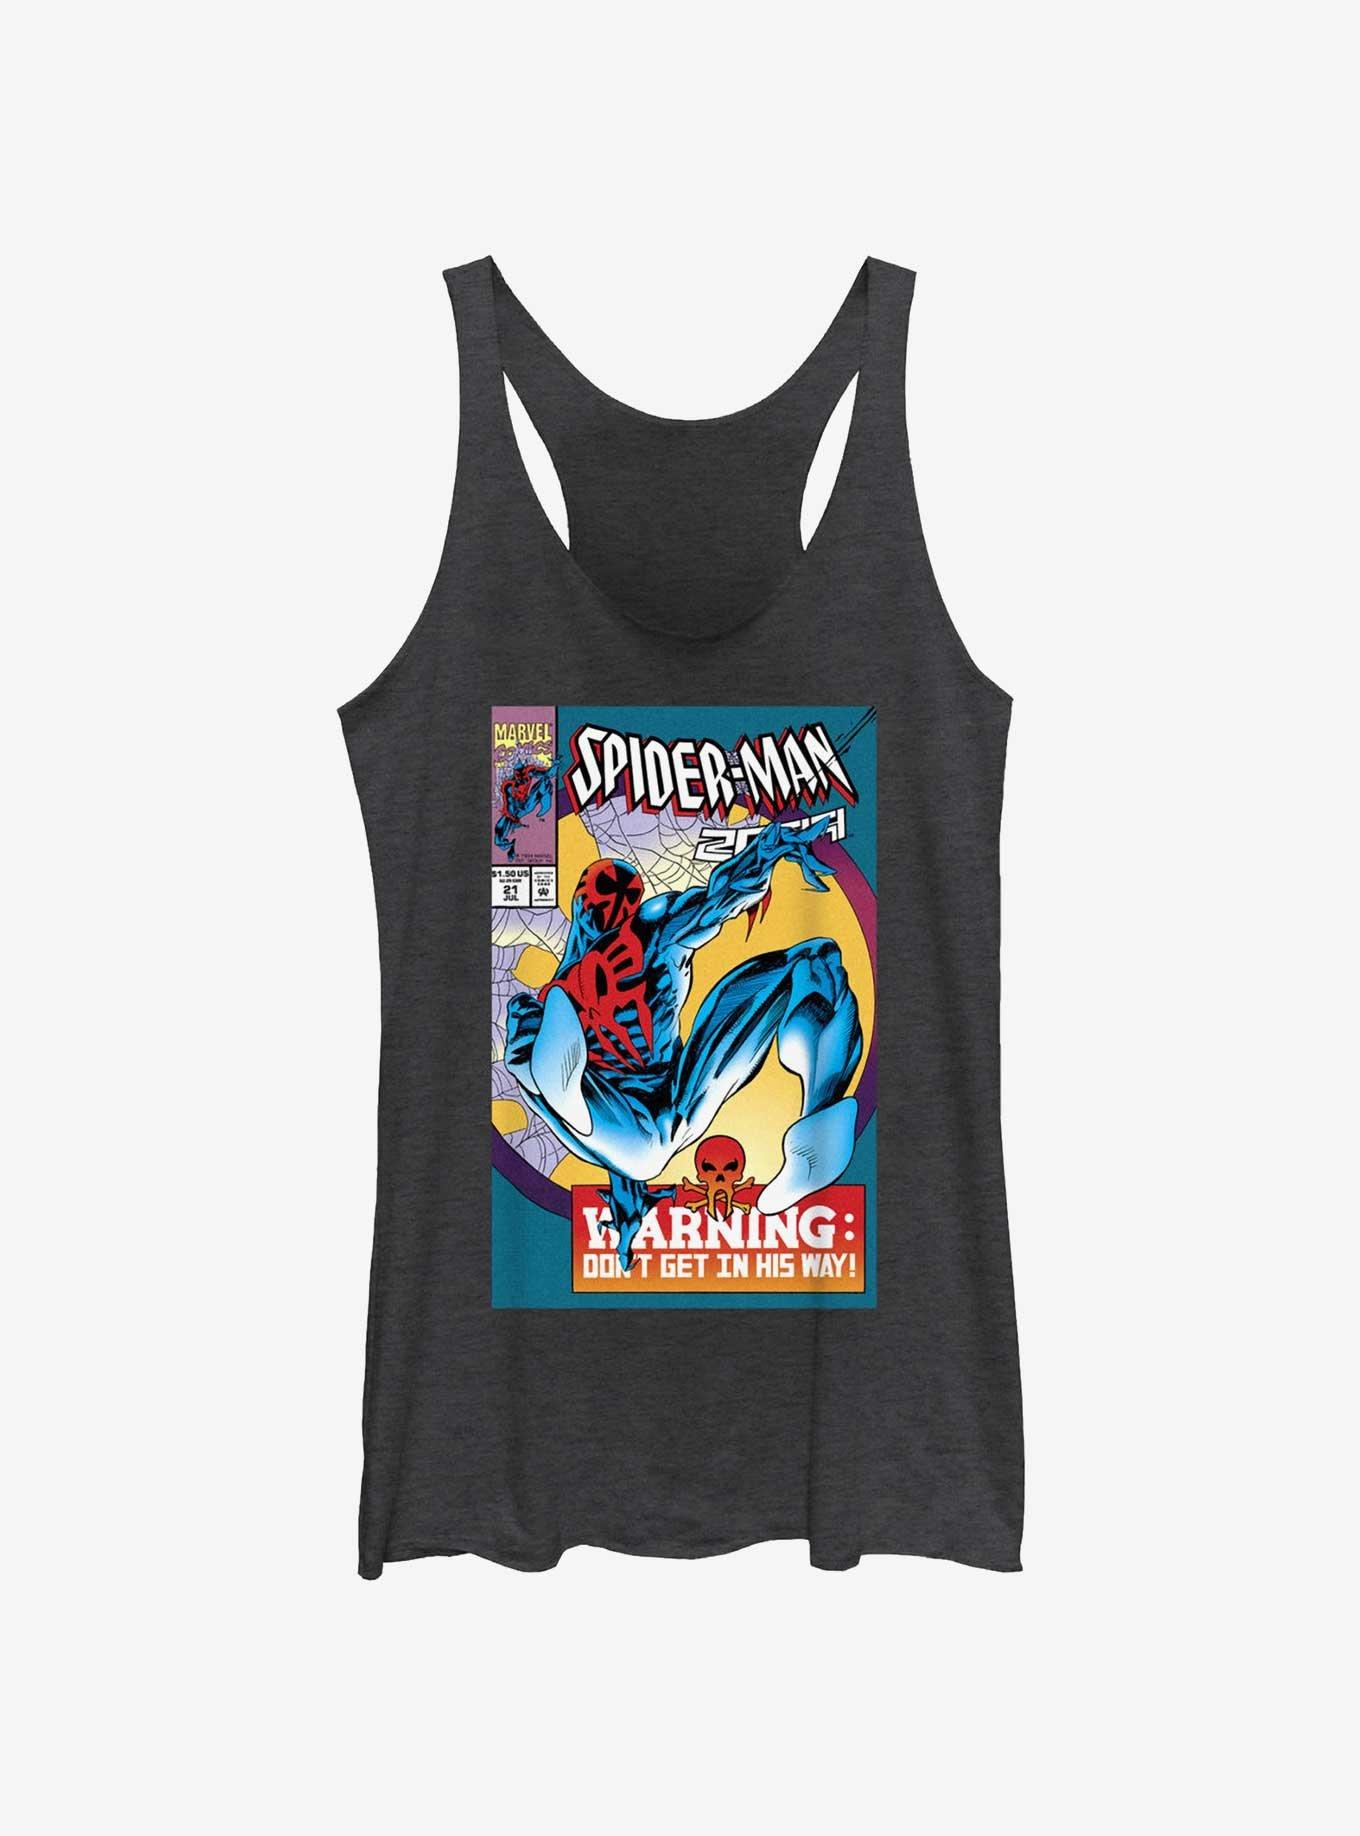 Marvel Spider-Man: Across the Spider-Verse O'Hara 2099 Comic Cover Womens Tank Top, BLK HTR, hi-res